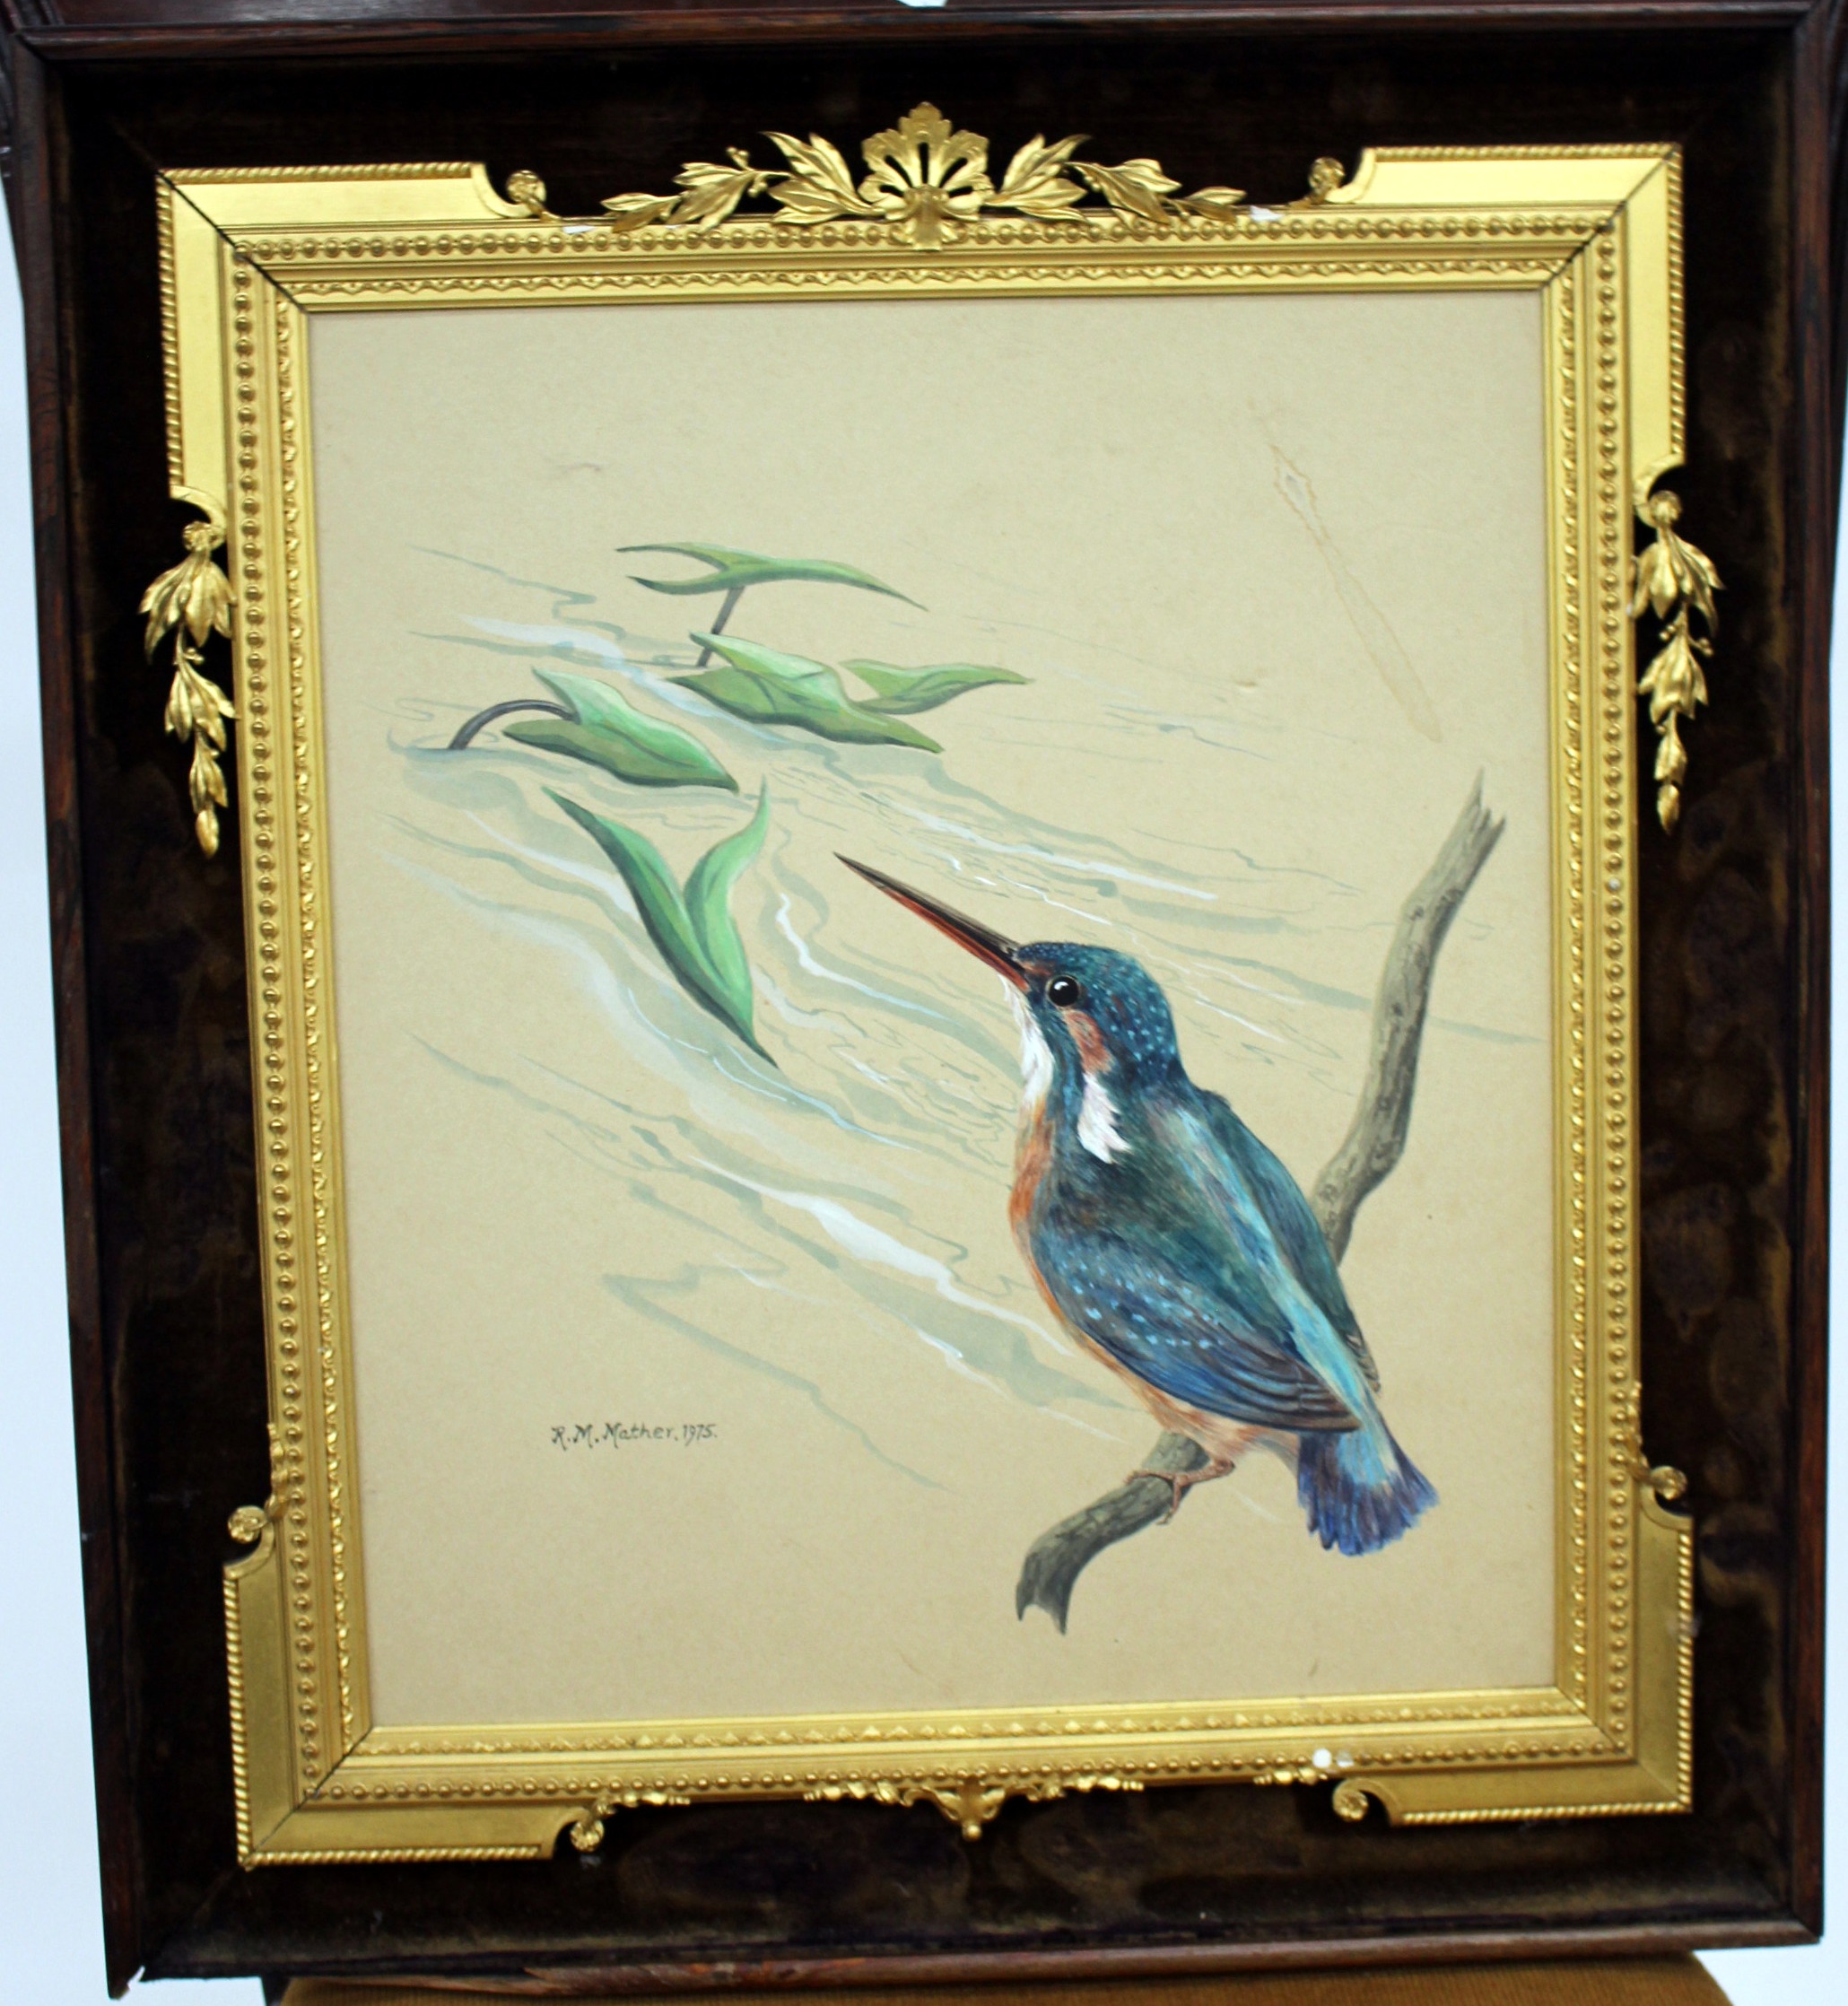 R.M. MATHER, 1975 Kingfisher on his perch, watercolour in a decorative gilt frame, 36cm x 29cm